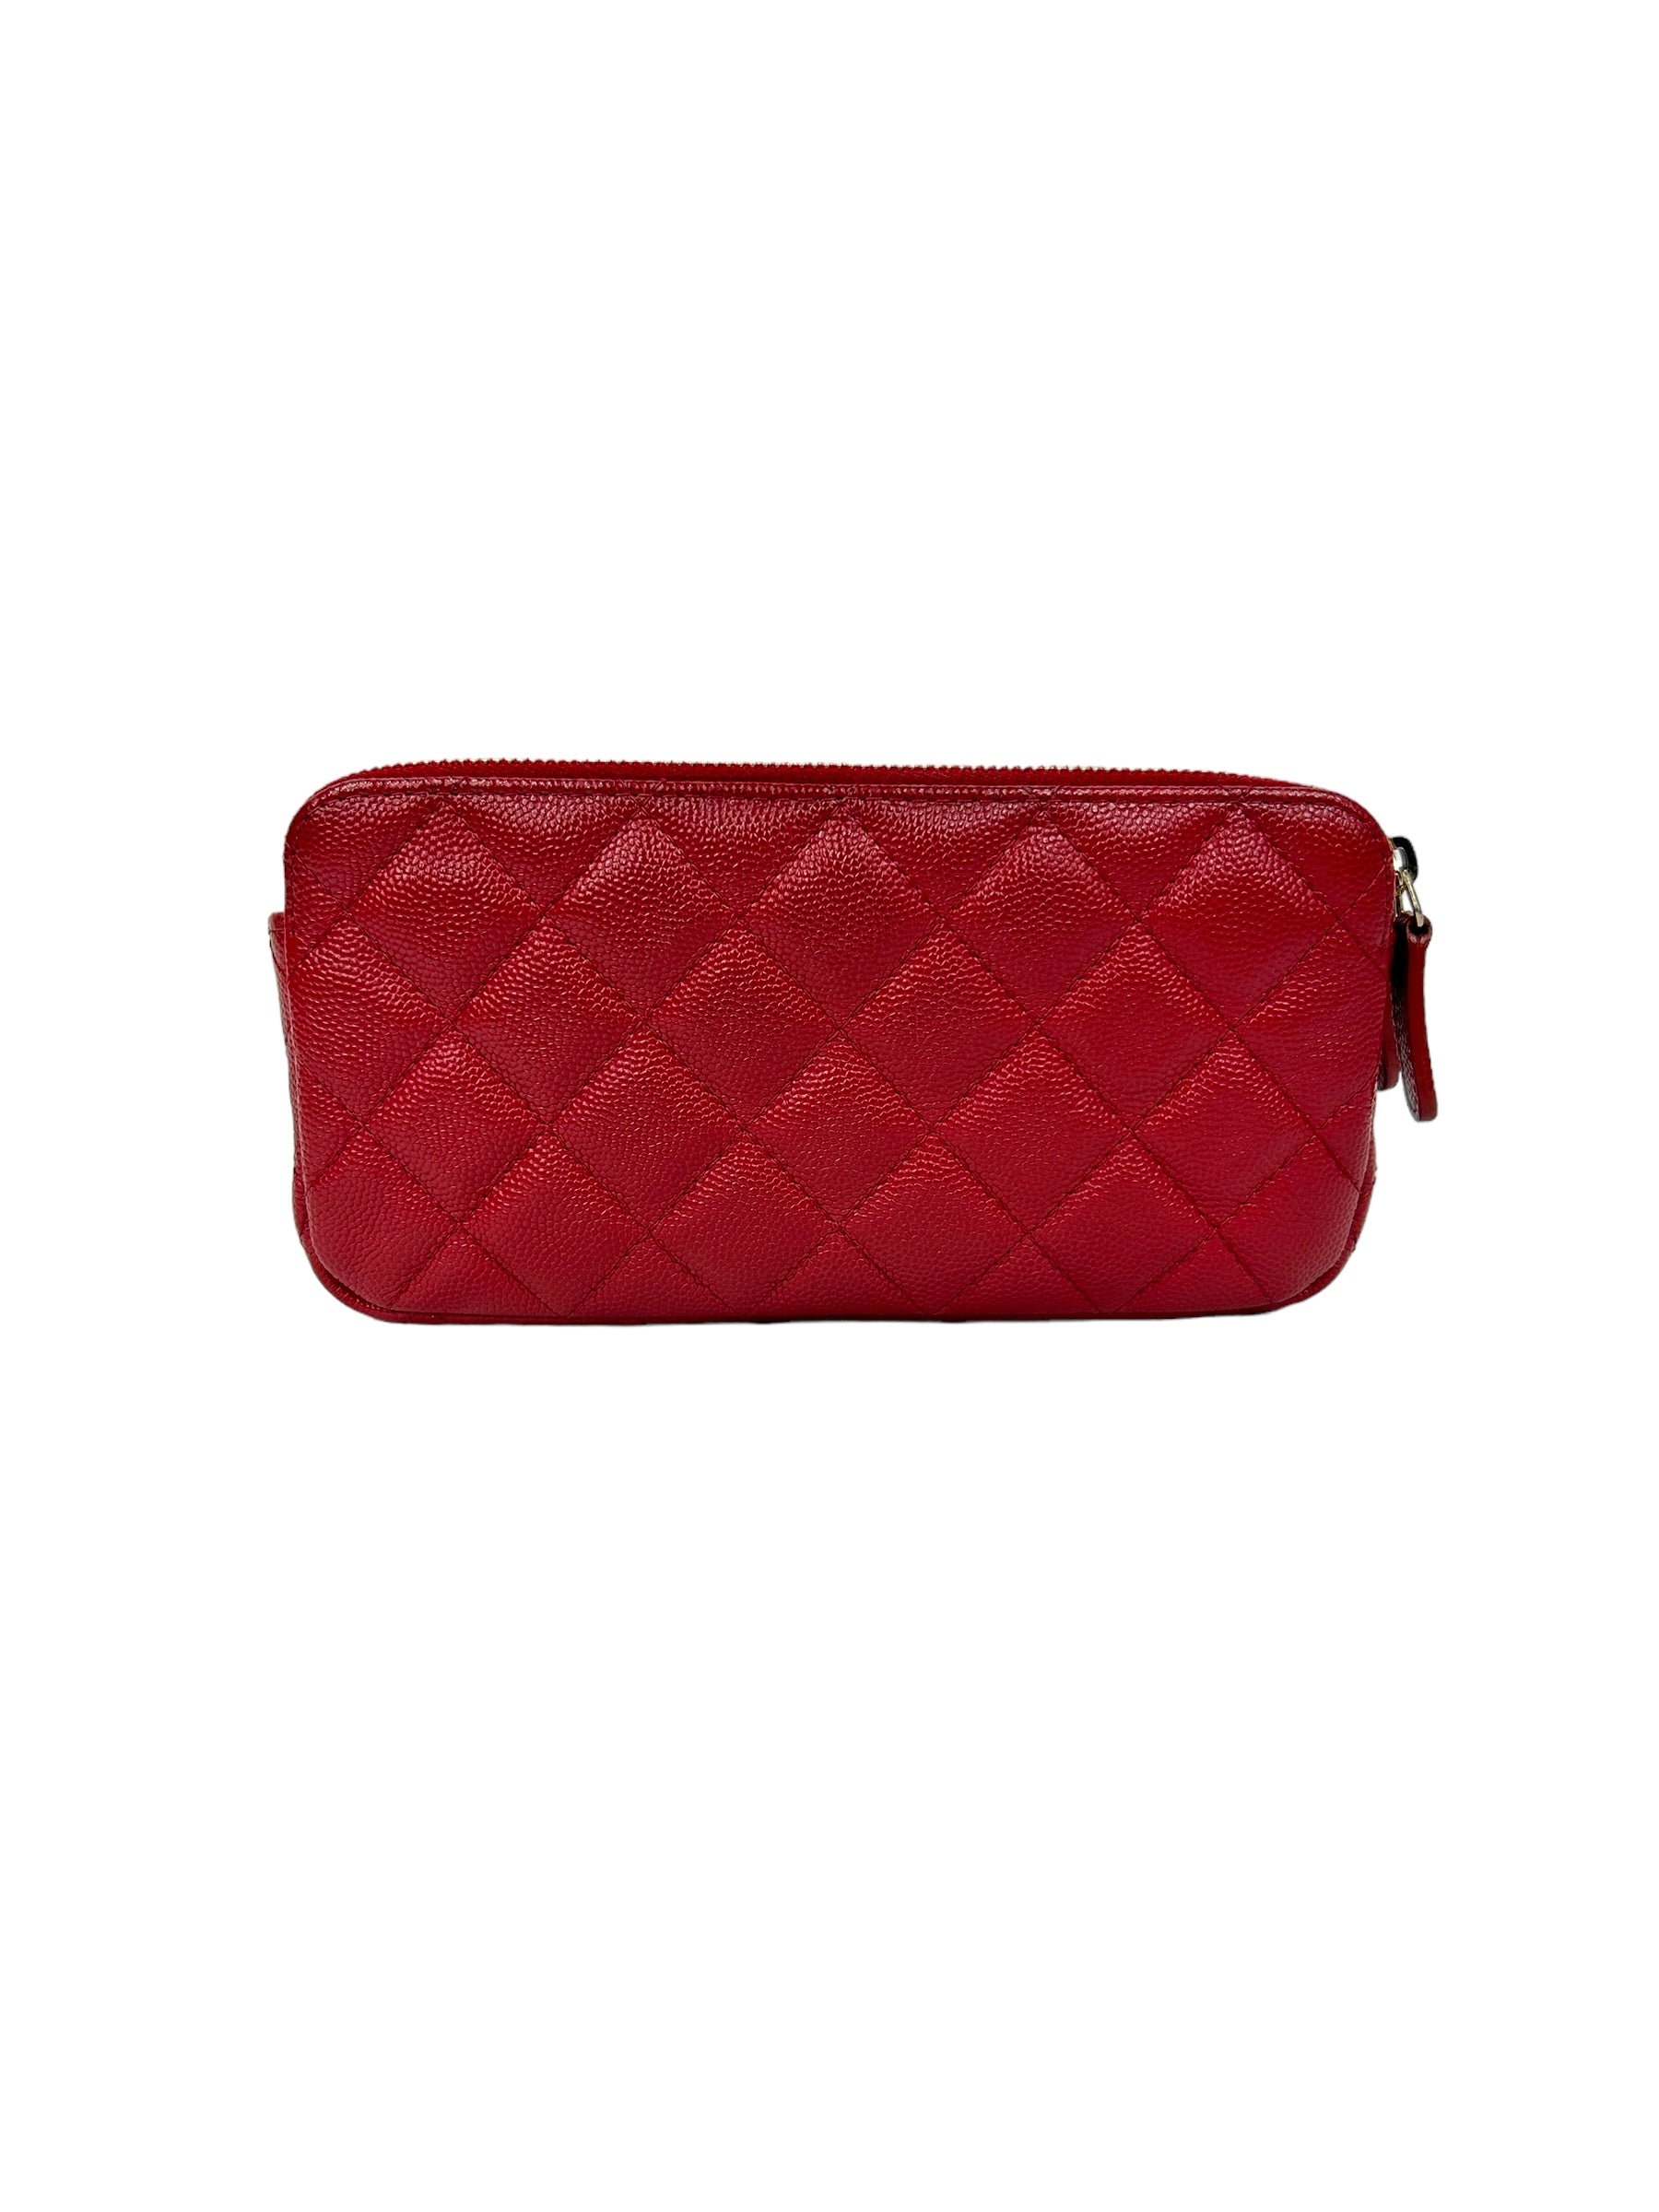 Red Caviar Quilted Double Zip Wallet On Chain w/GHW,